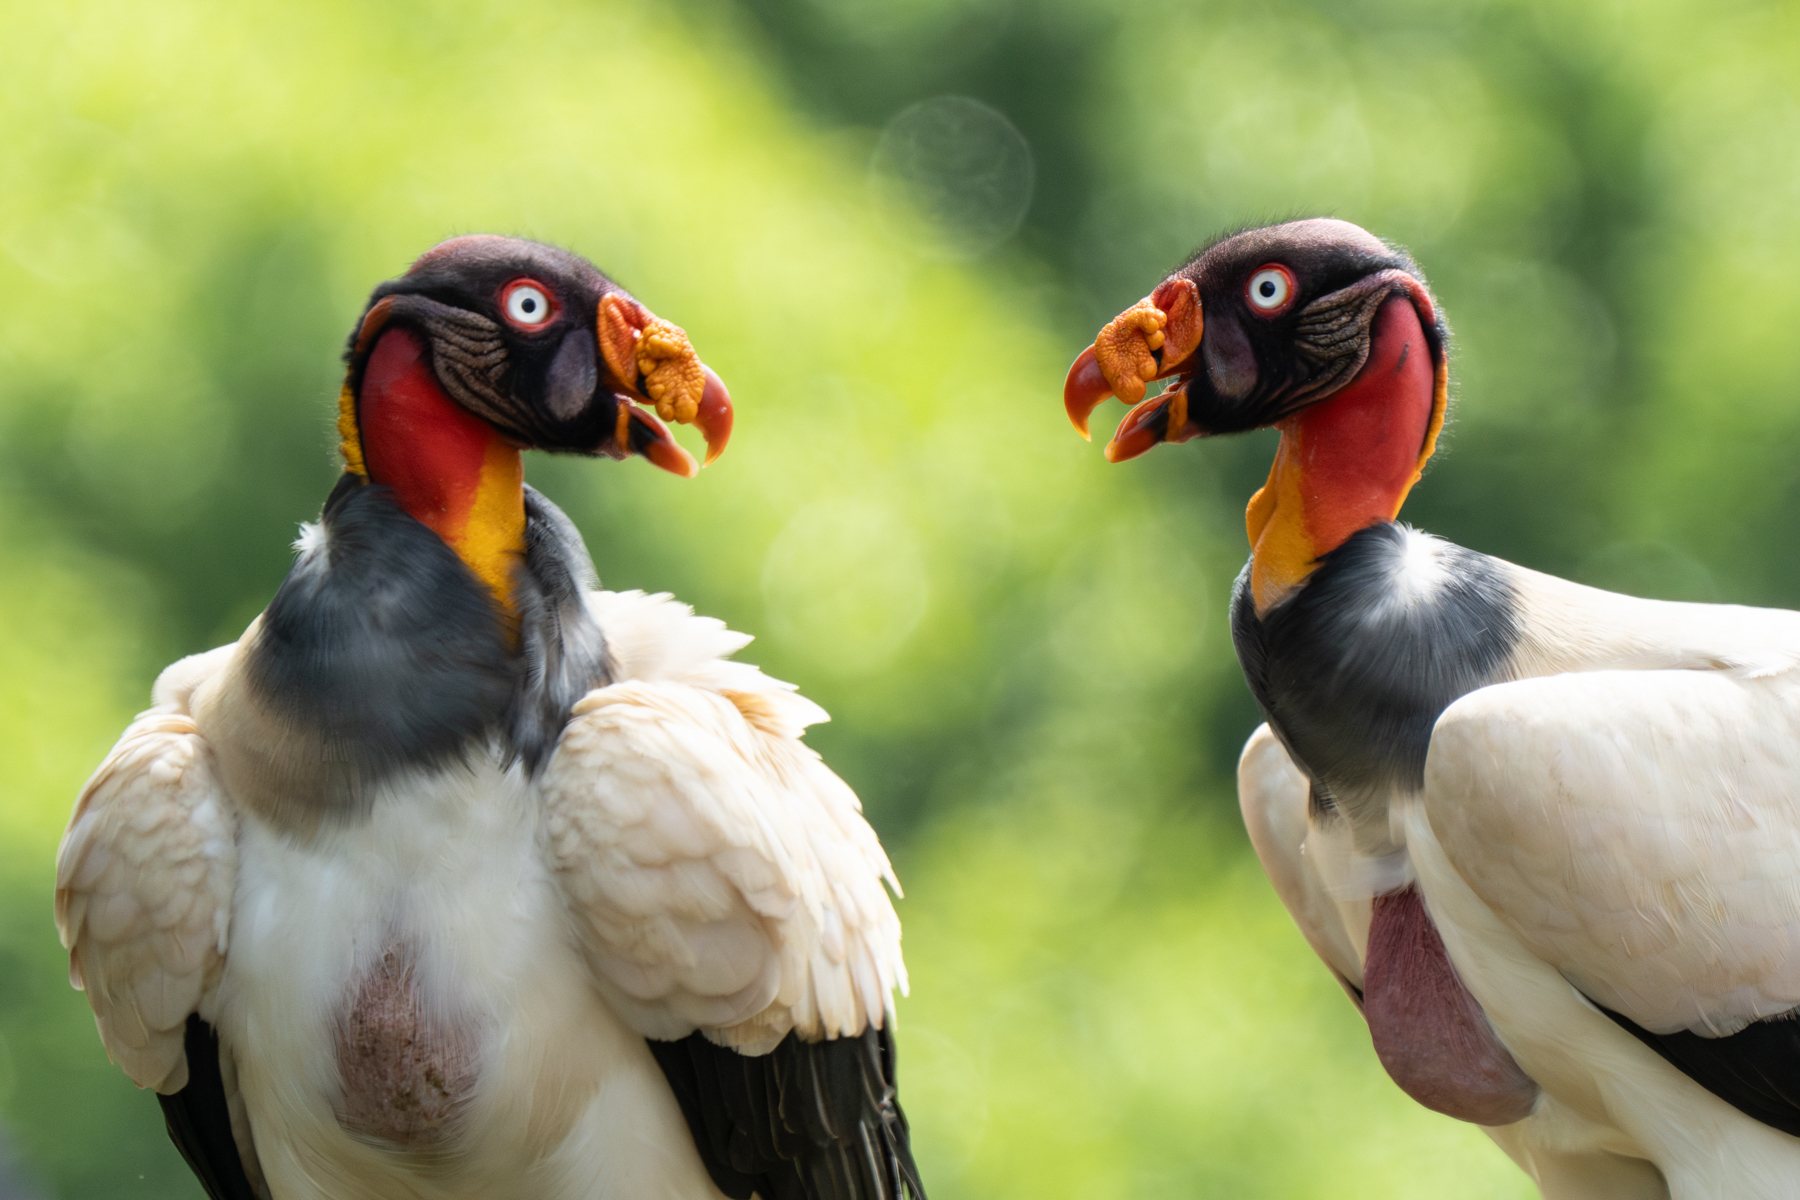 There's only one thing better than one King Vulture and that's a pair (image by Inger Vandyke)